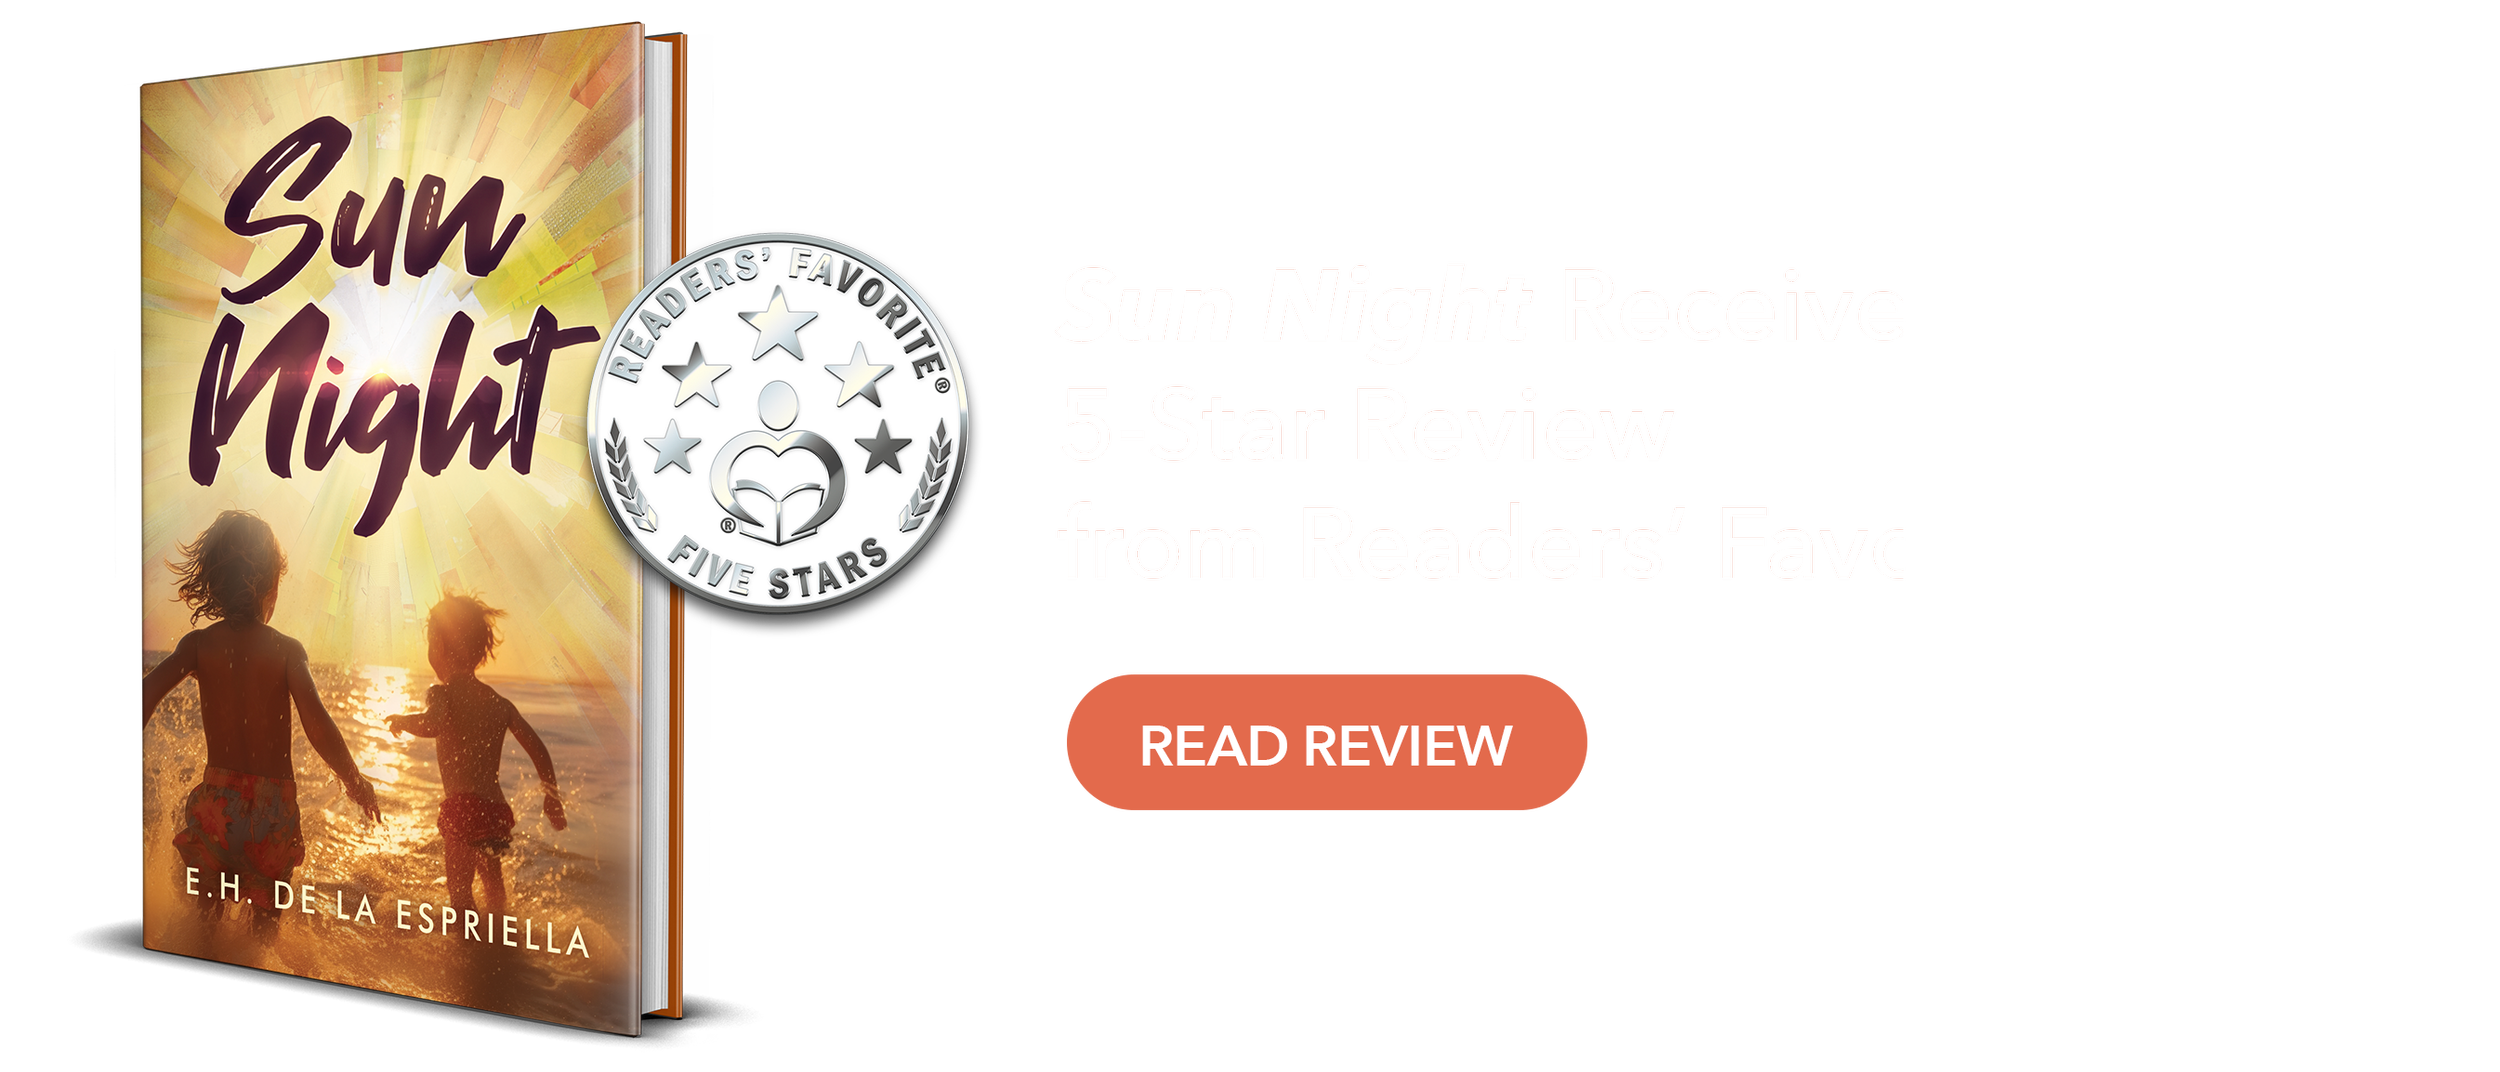 HeaderImage-5StarReview.png